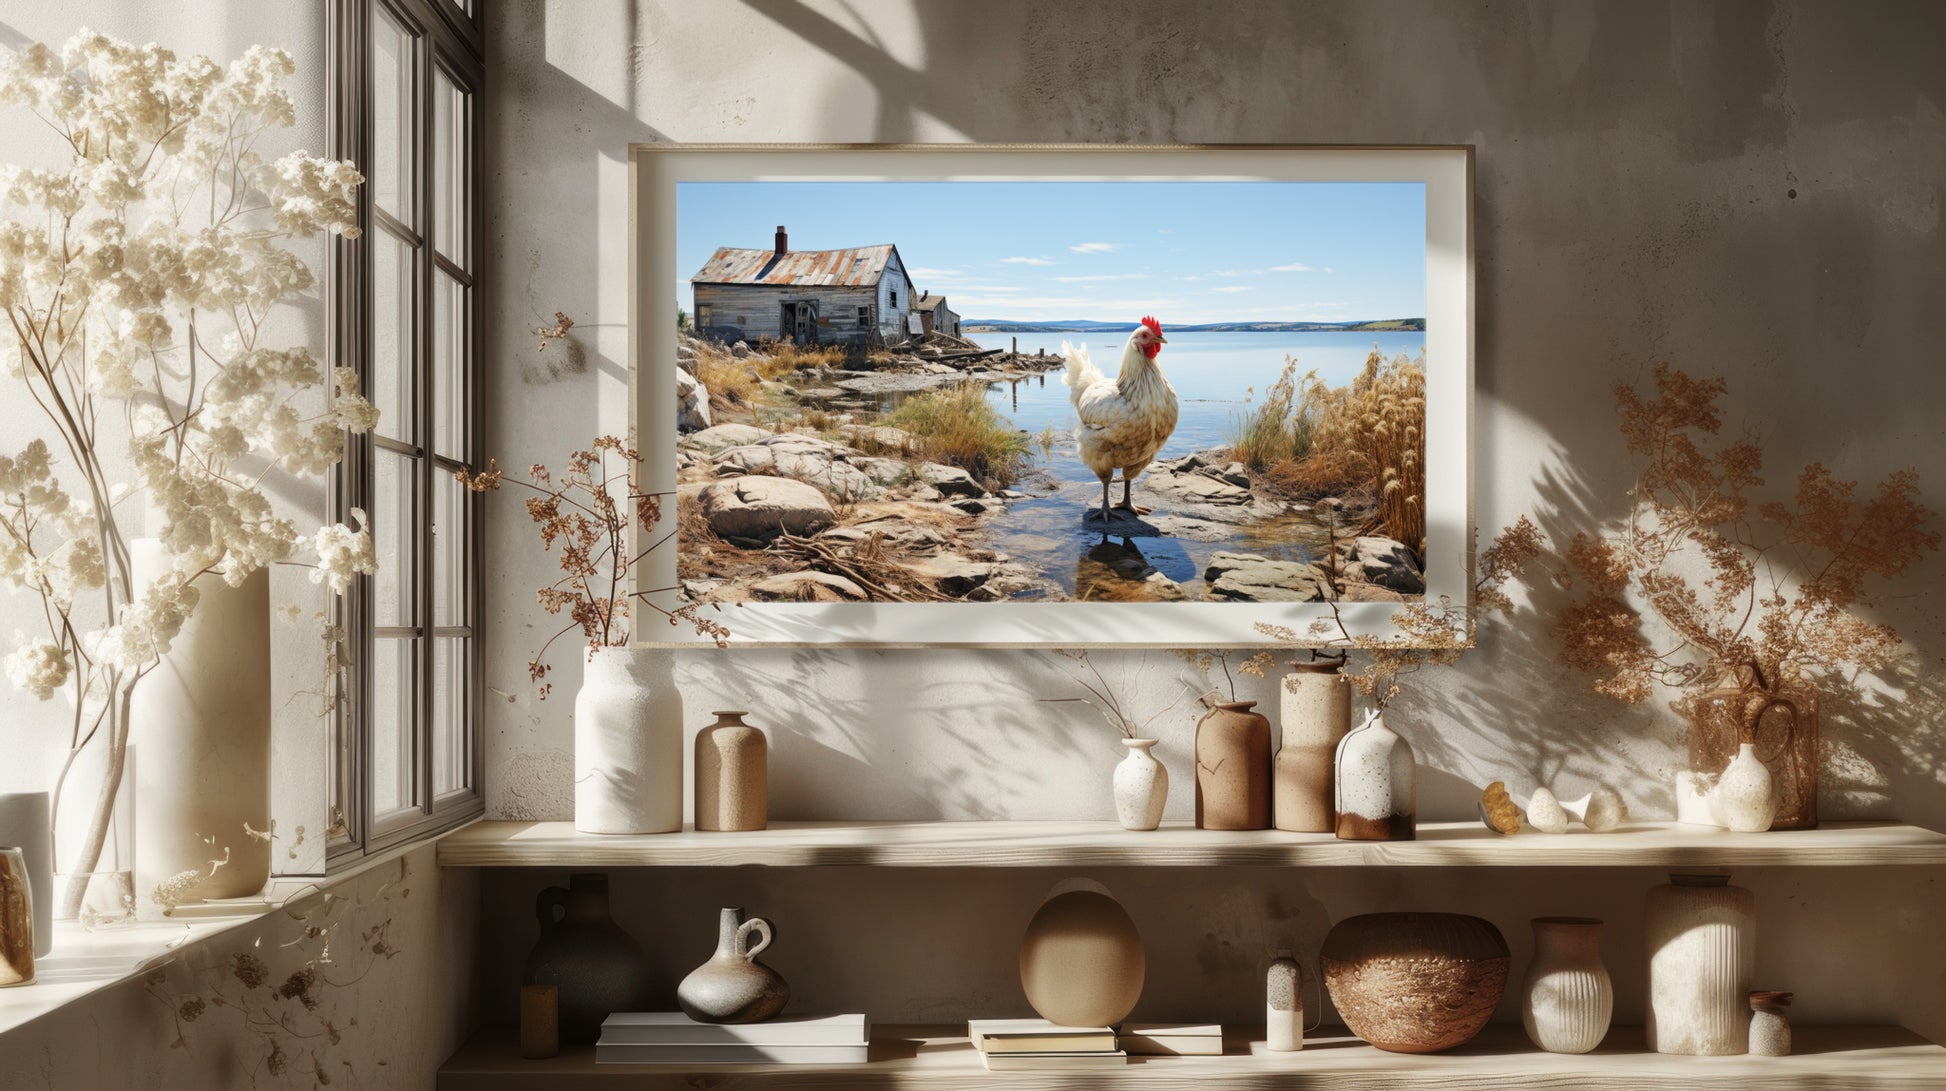 Down East Collection artwork print depicting a rooster standing near a weathered house by the coast, designed for archival and acid-free fine art prints.